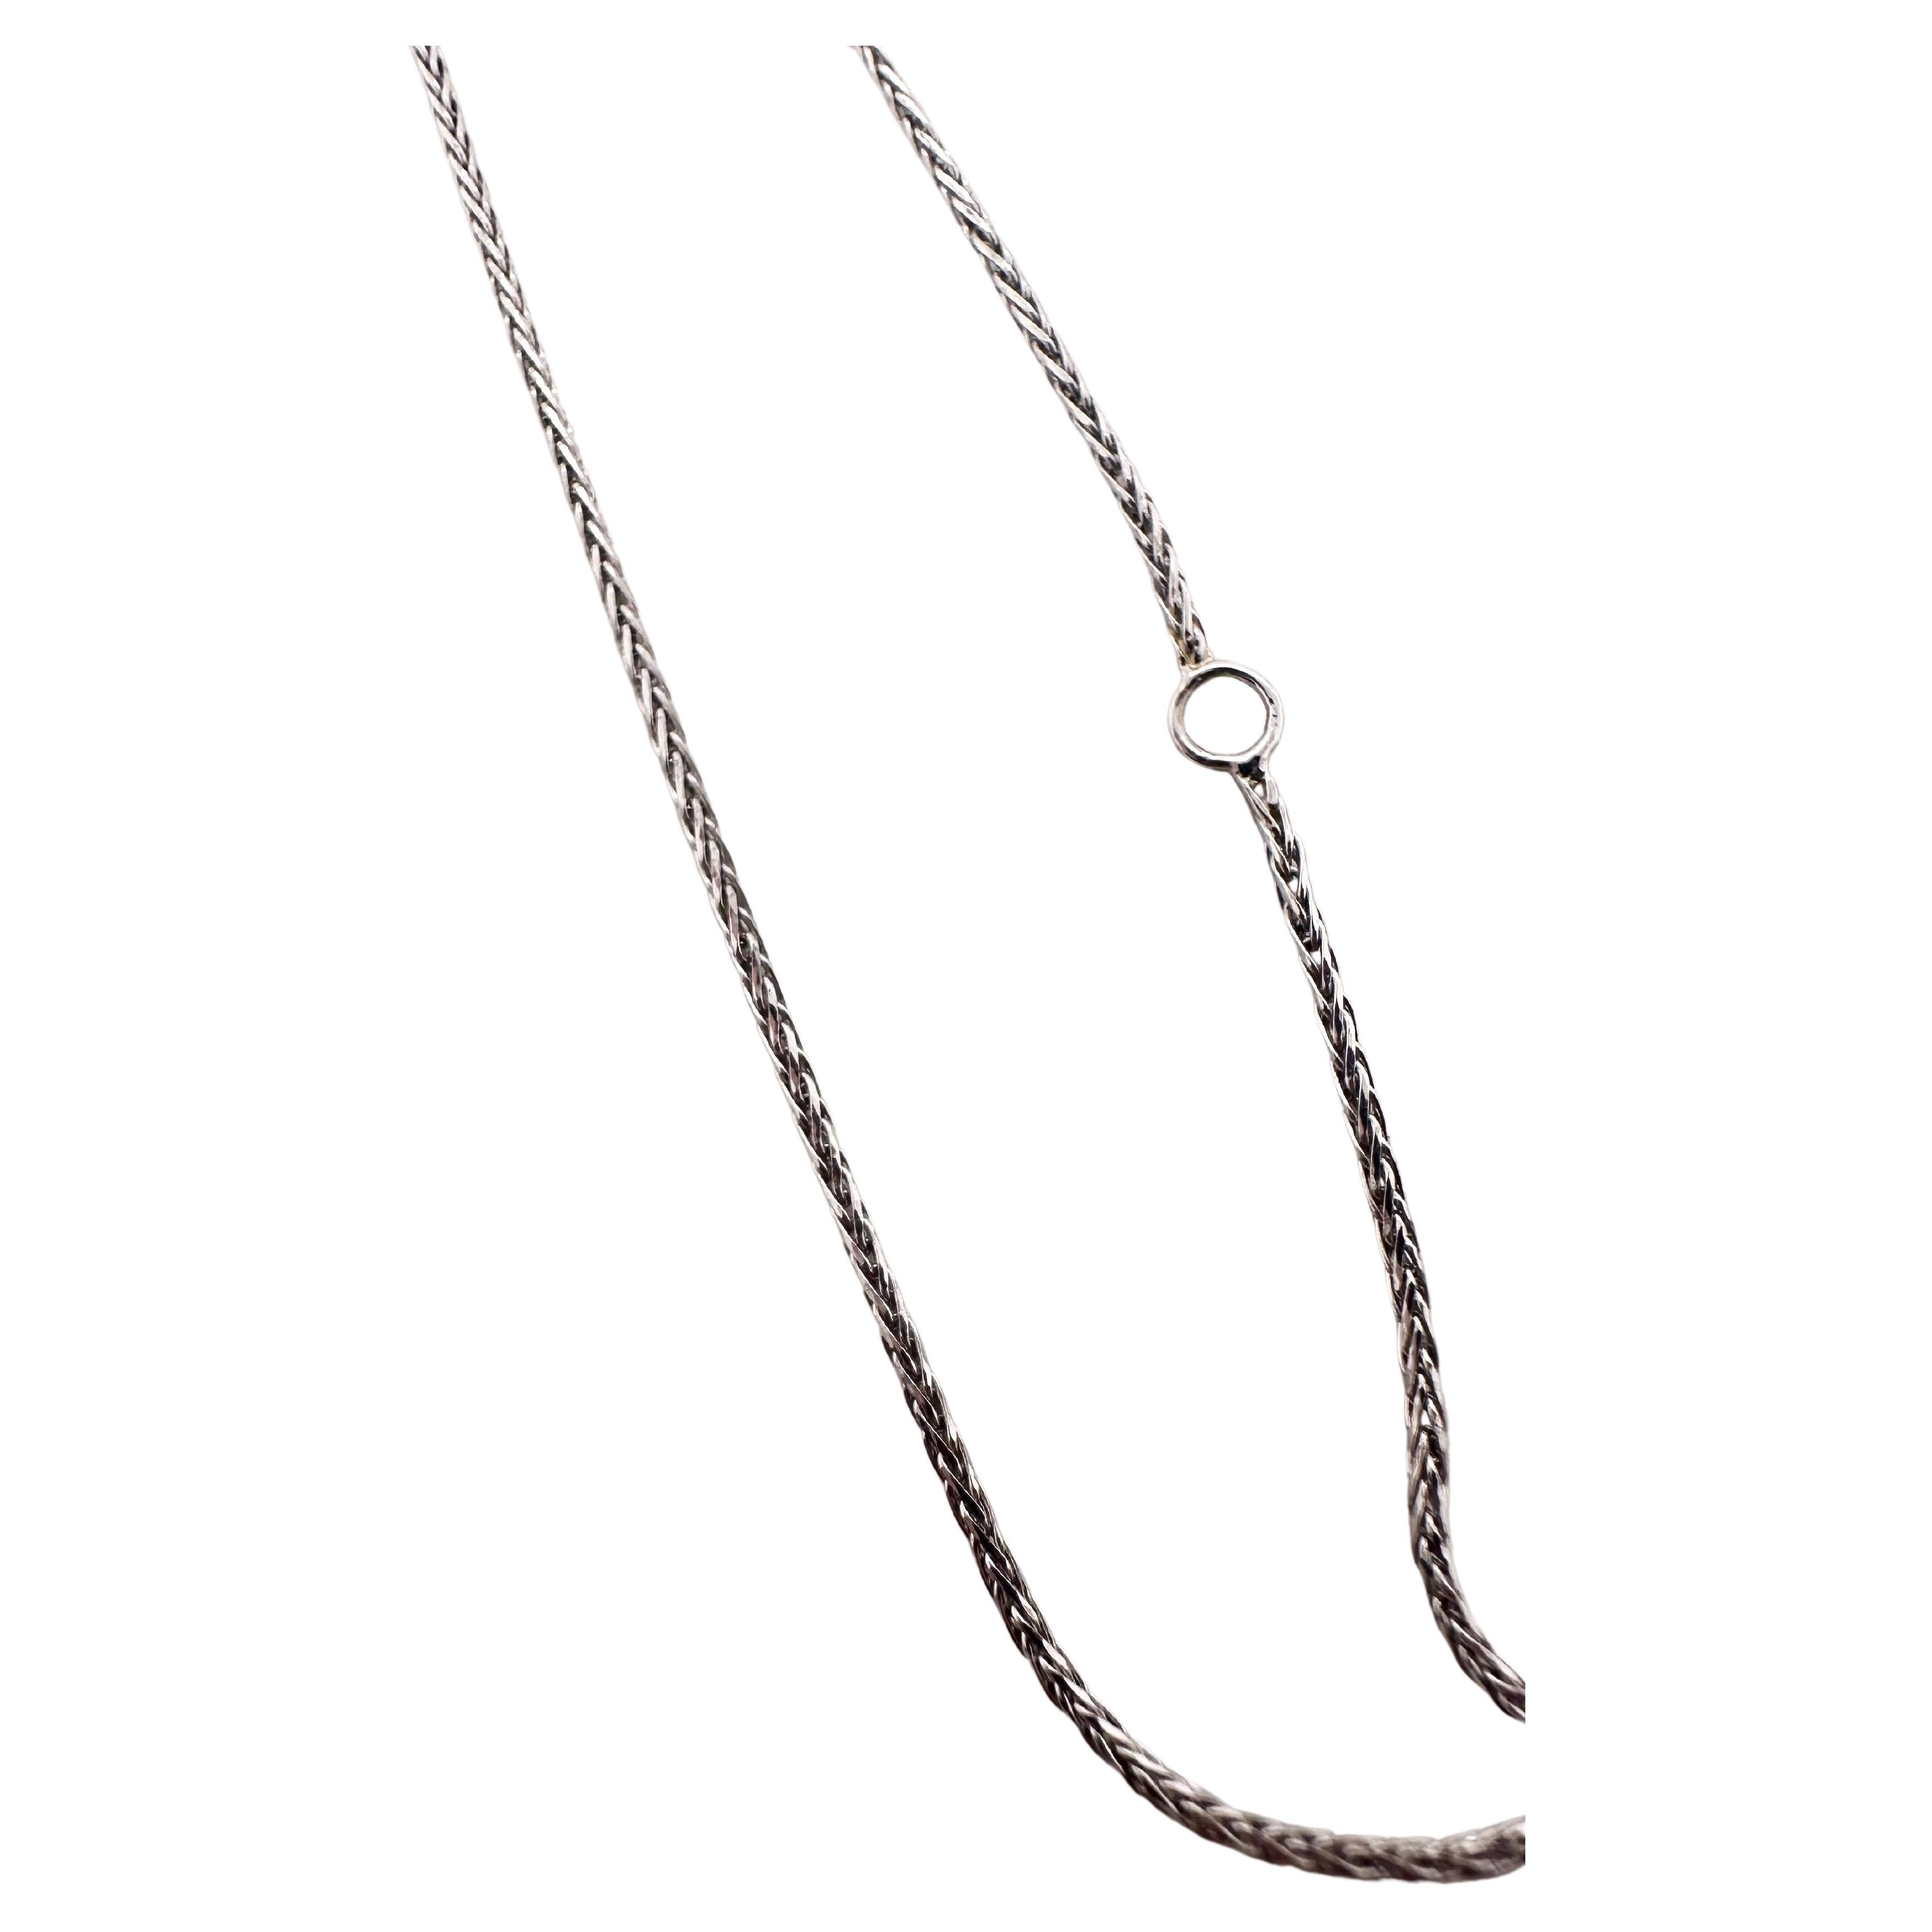 Simple snake chain 18KT white gold, very comfortable made in Italy, it has an option to close at 16-18